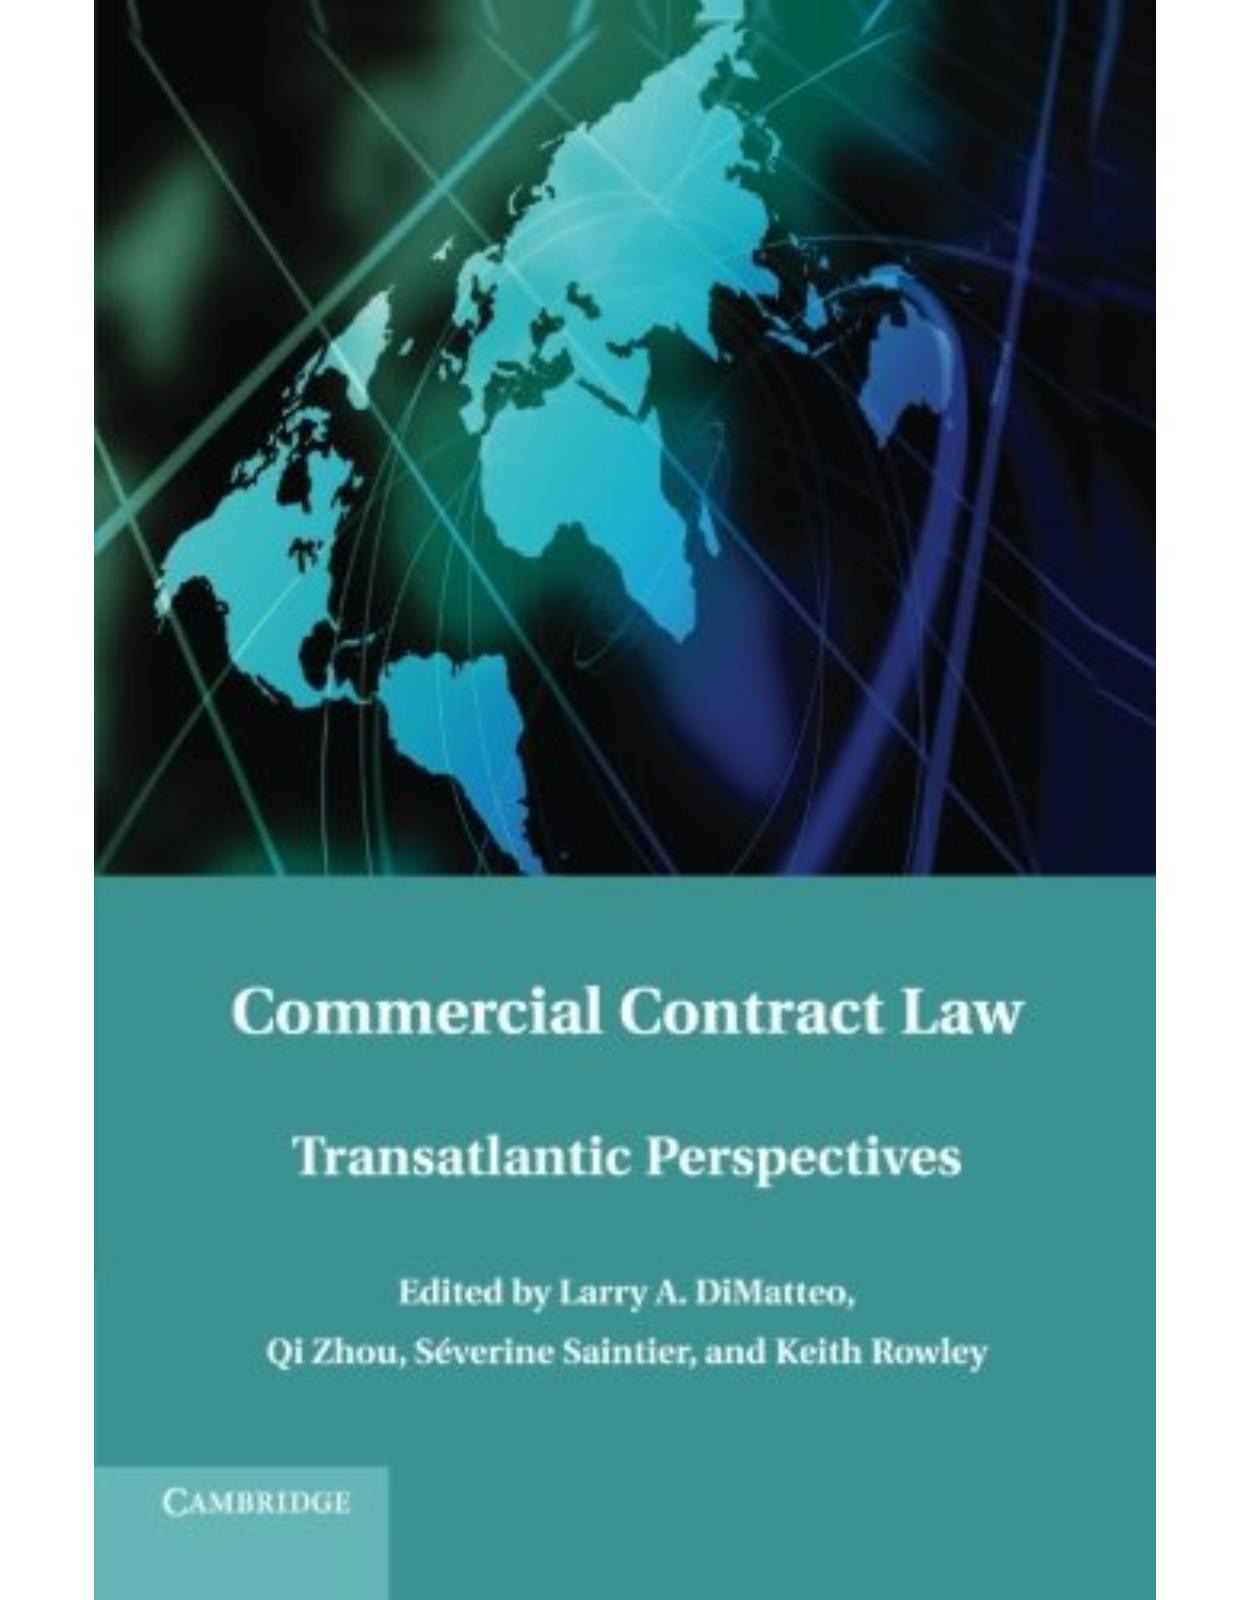 Commercial Contract Law: Transatlantic Perspectives